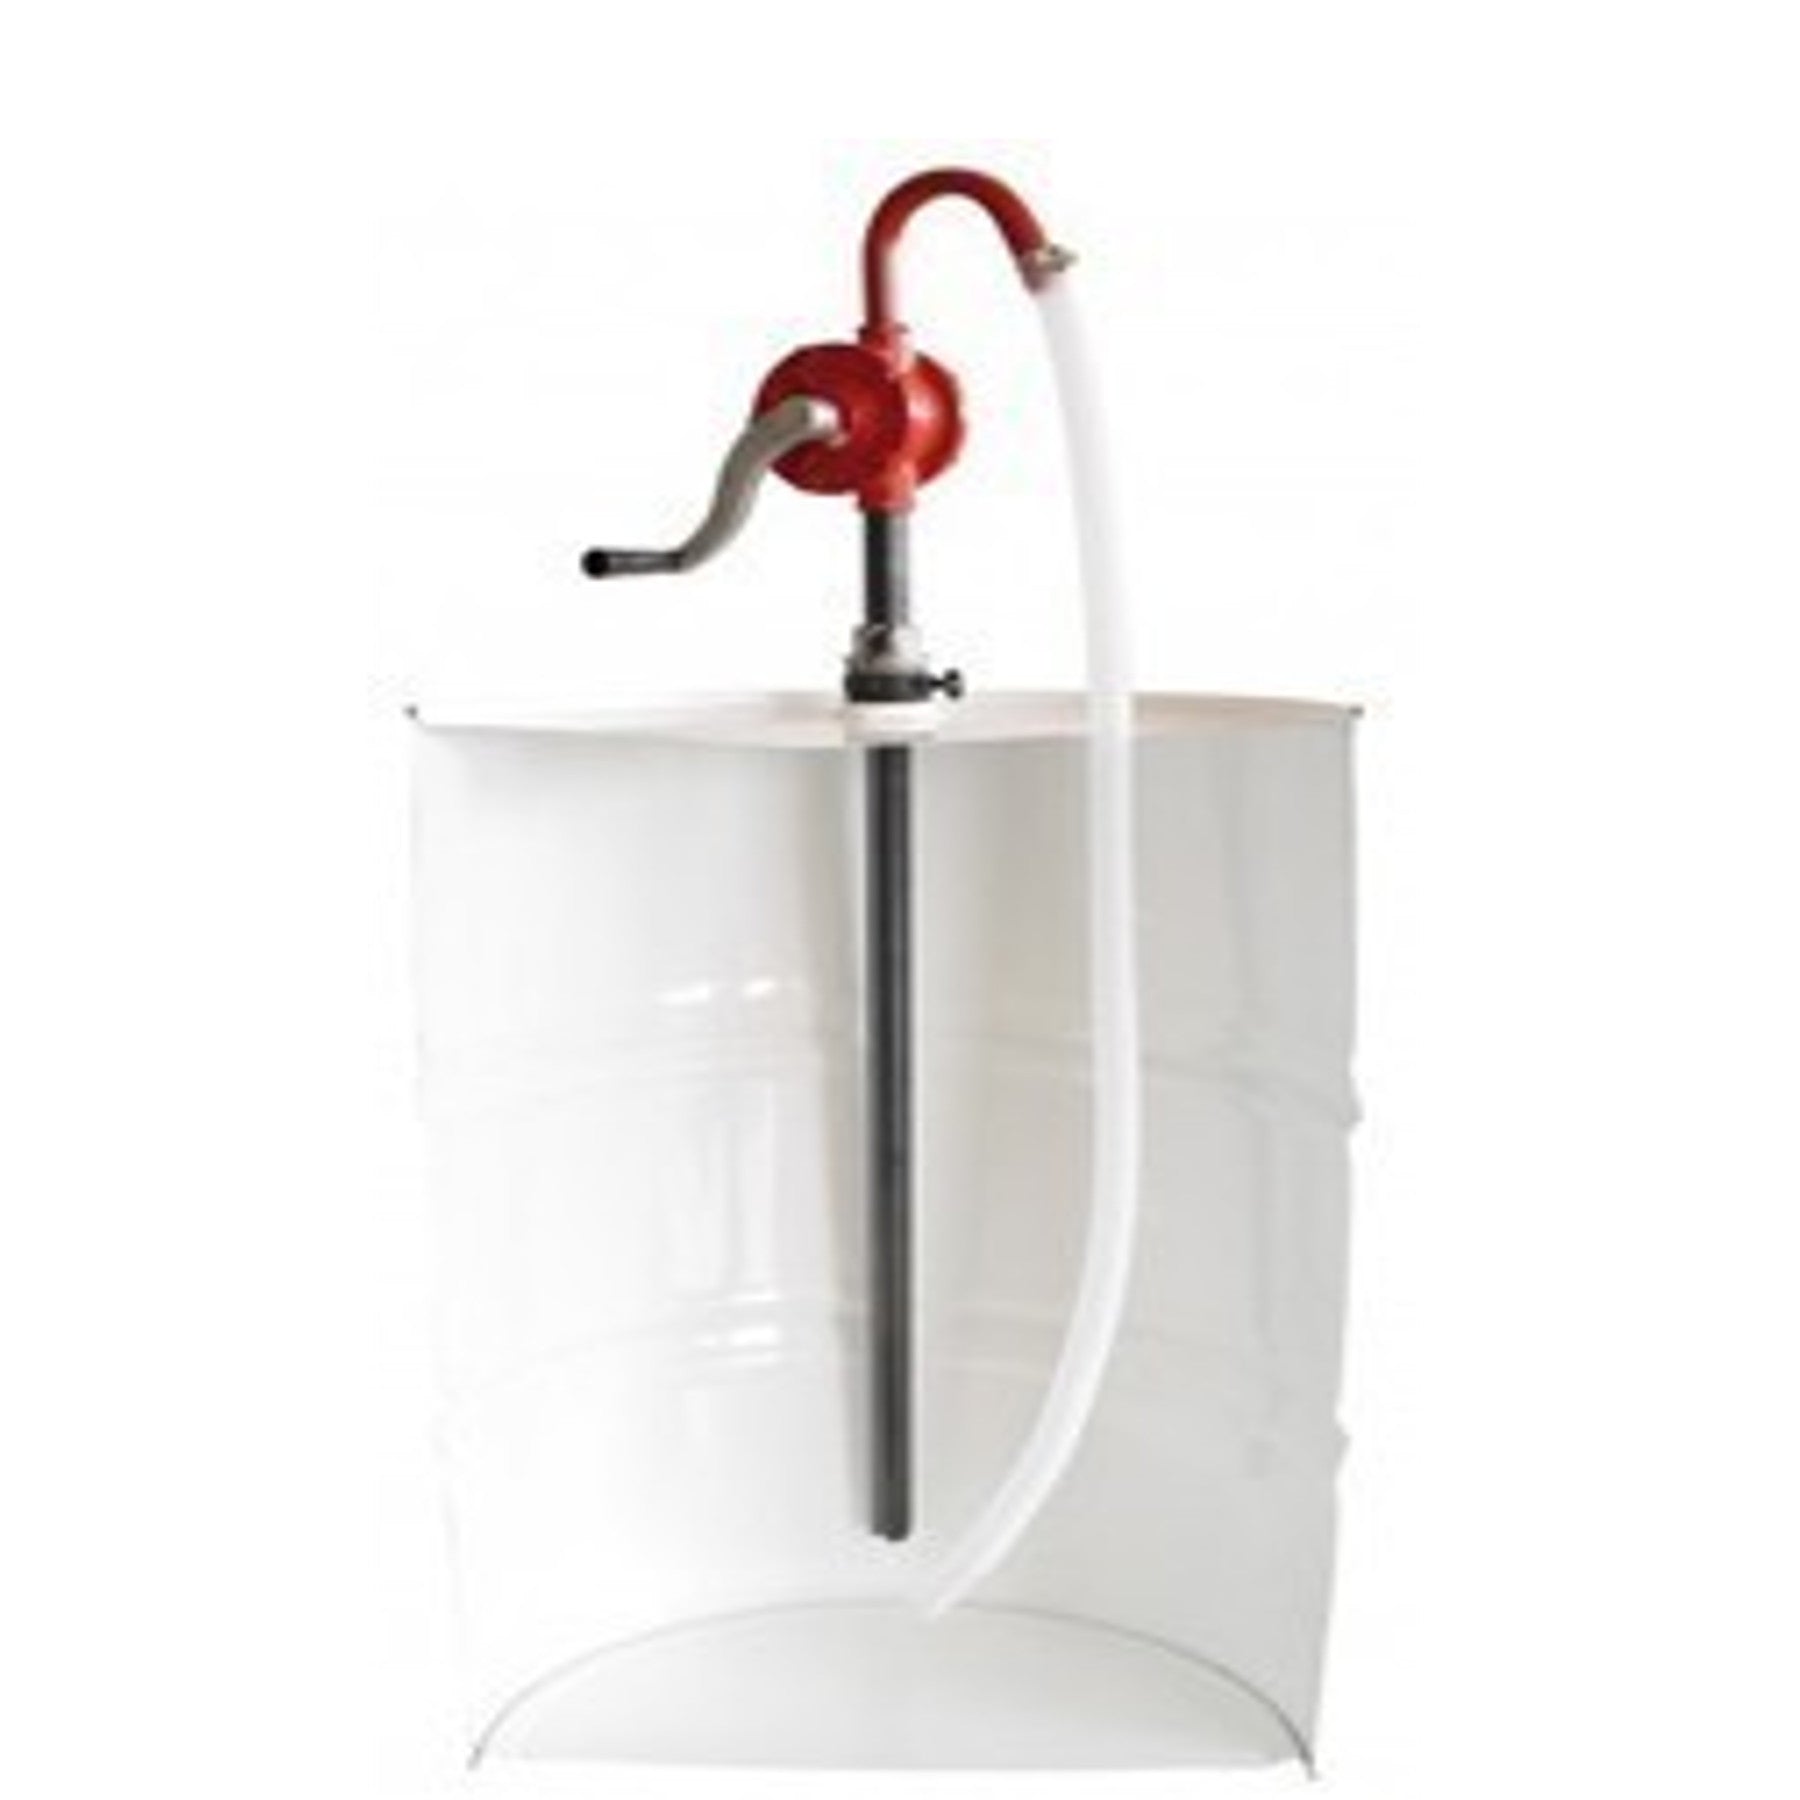 Rotary hand drum pump for fuels lubricants oils